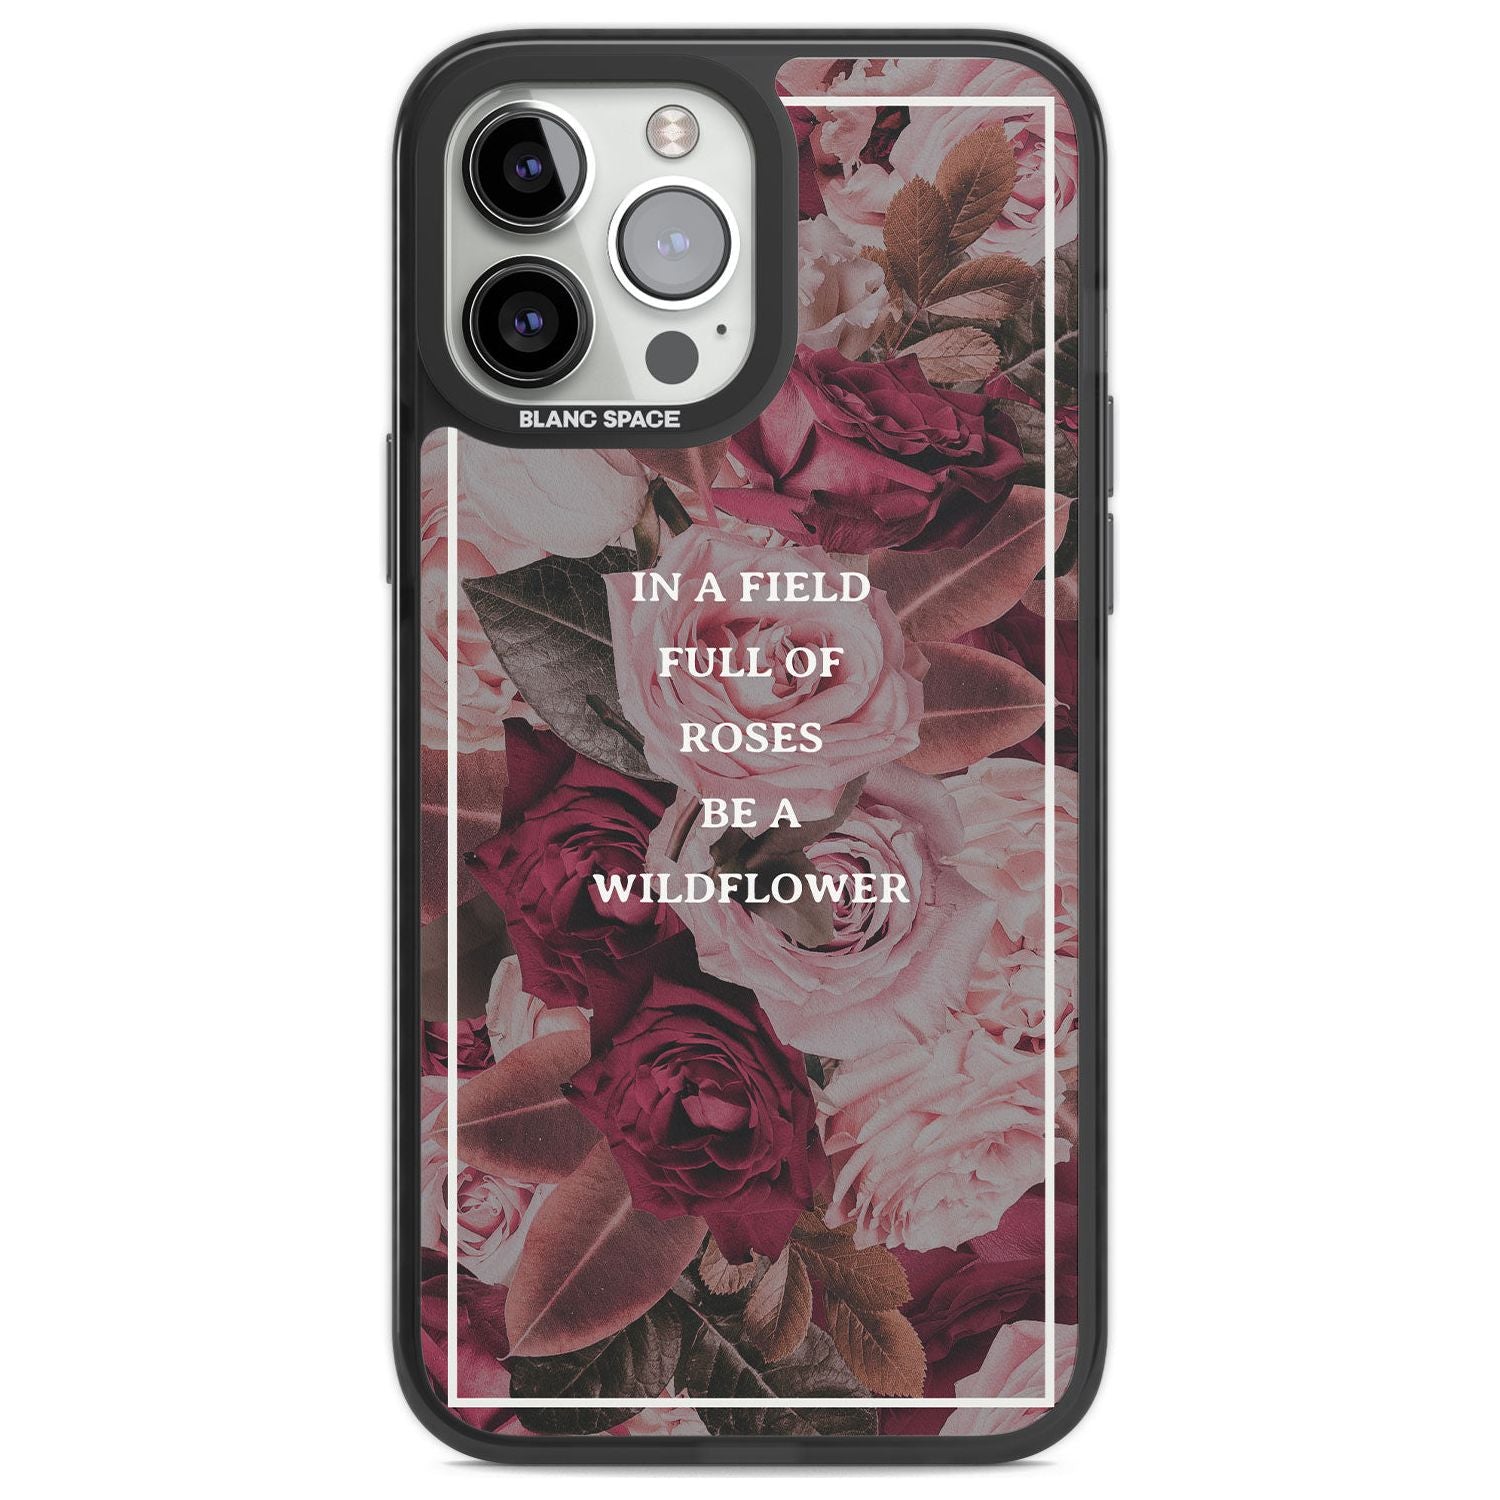 Be a Wildflower Floral Quote Phone Case iPhone 13 Pro Max / Black Impact Case,iPhone 14 Pro Max / Black Impact Case Blanc Space